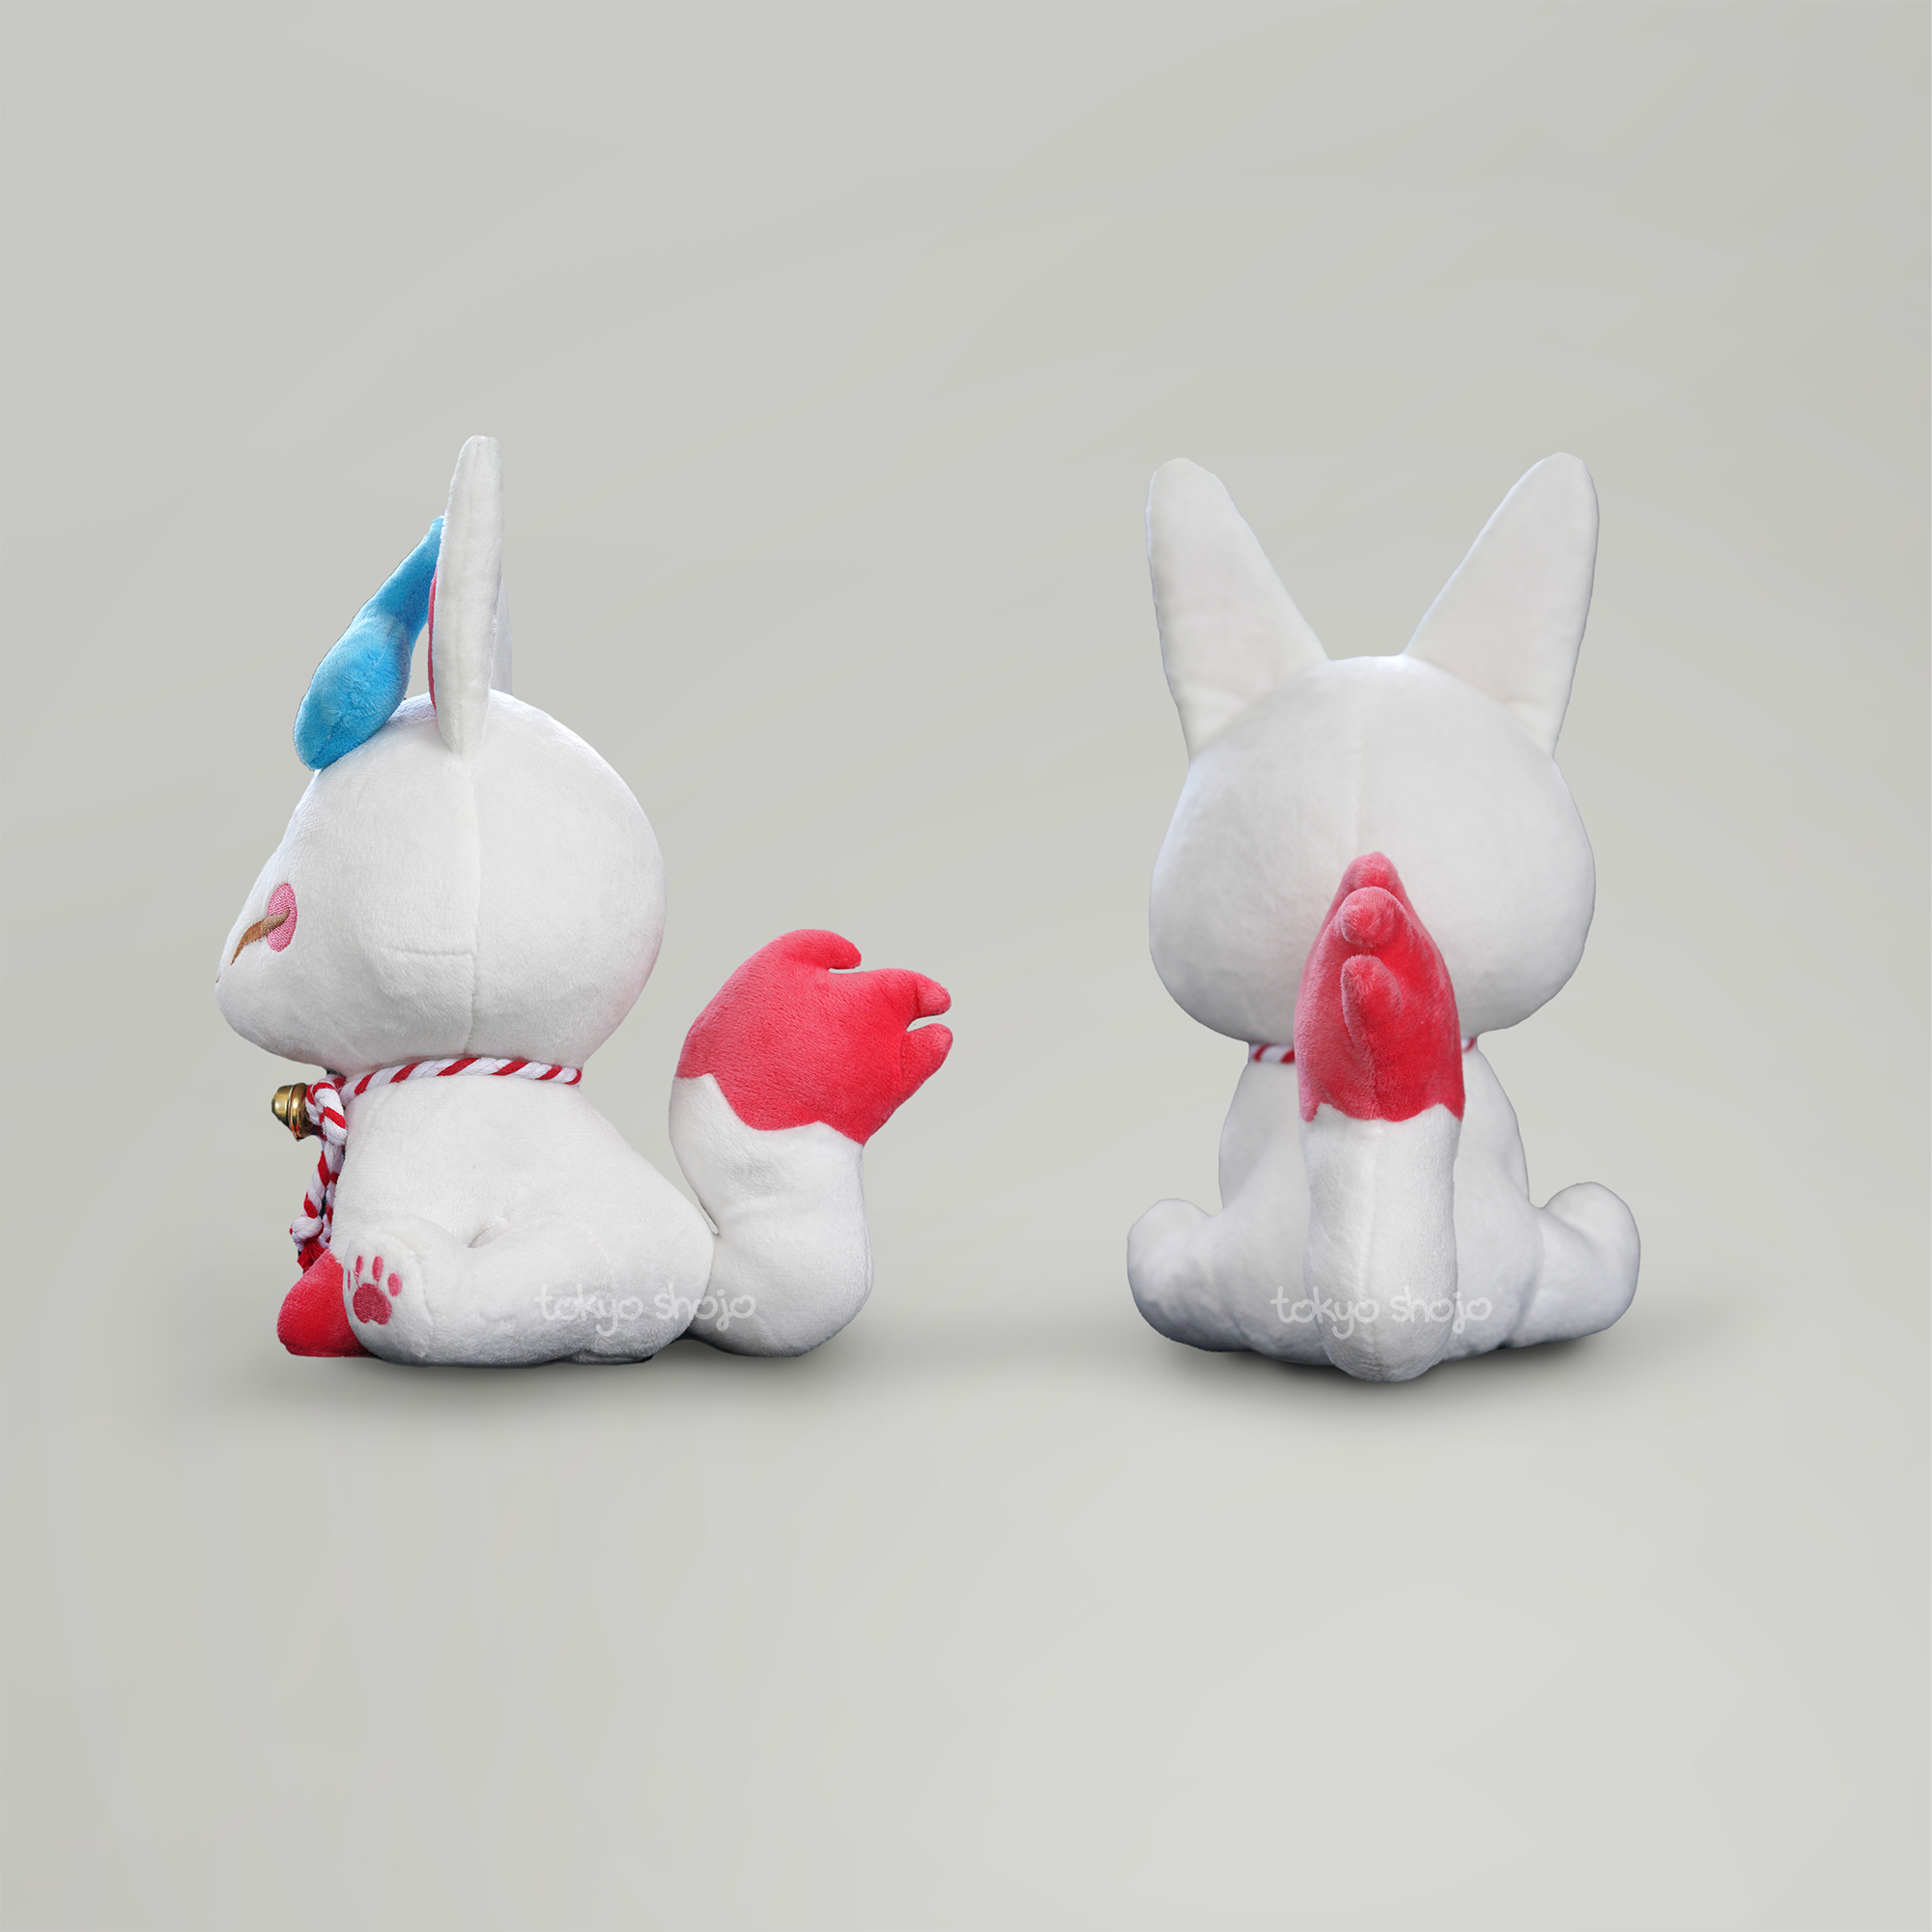 Plushie_Inari_Side_4133e9fe-44b0-4ace-8299-d1803692920d.png